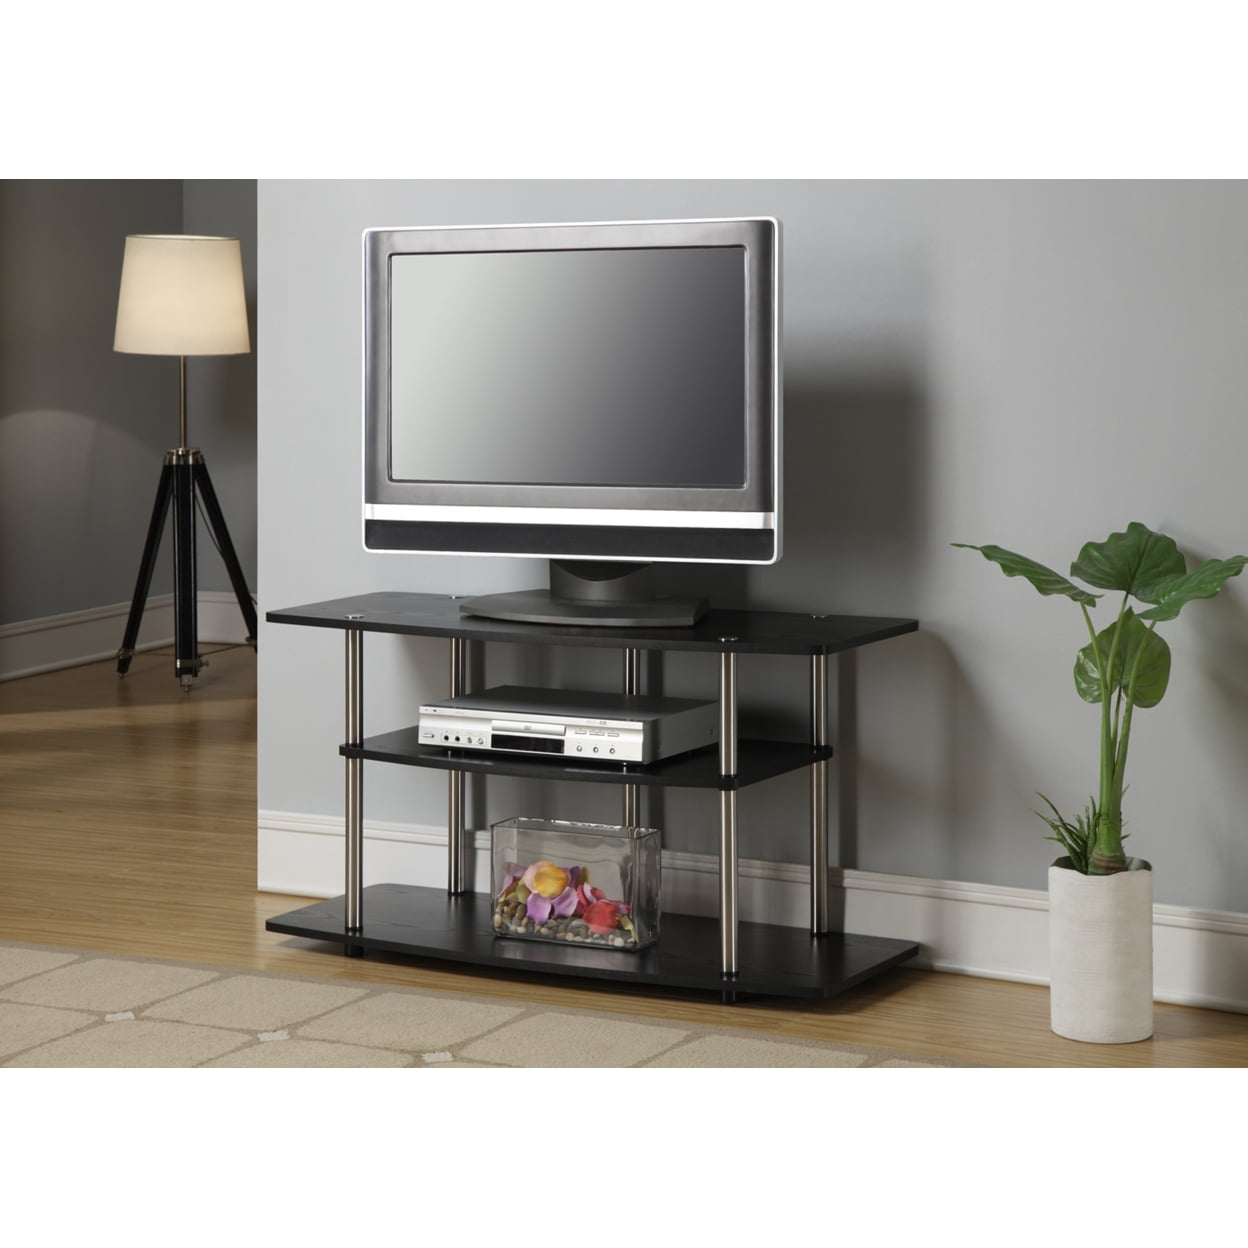 Designs2Go Small TV Stand for TVs up to 25 Black - Breighton Home